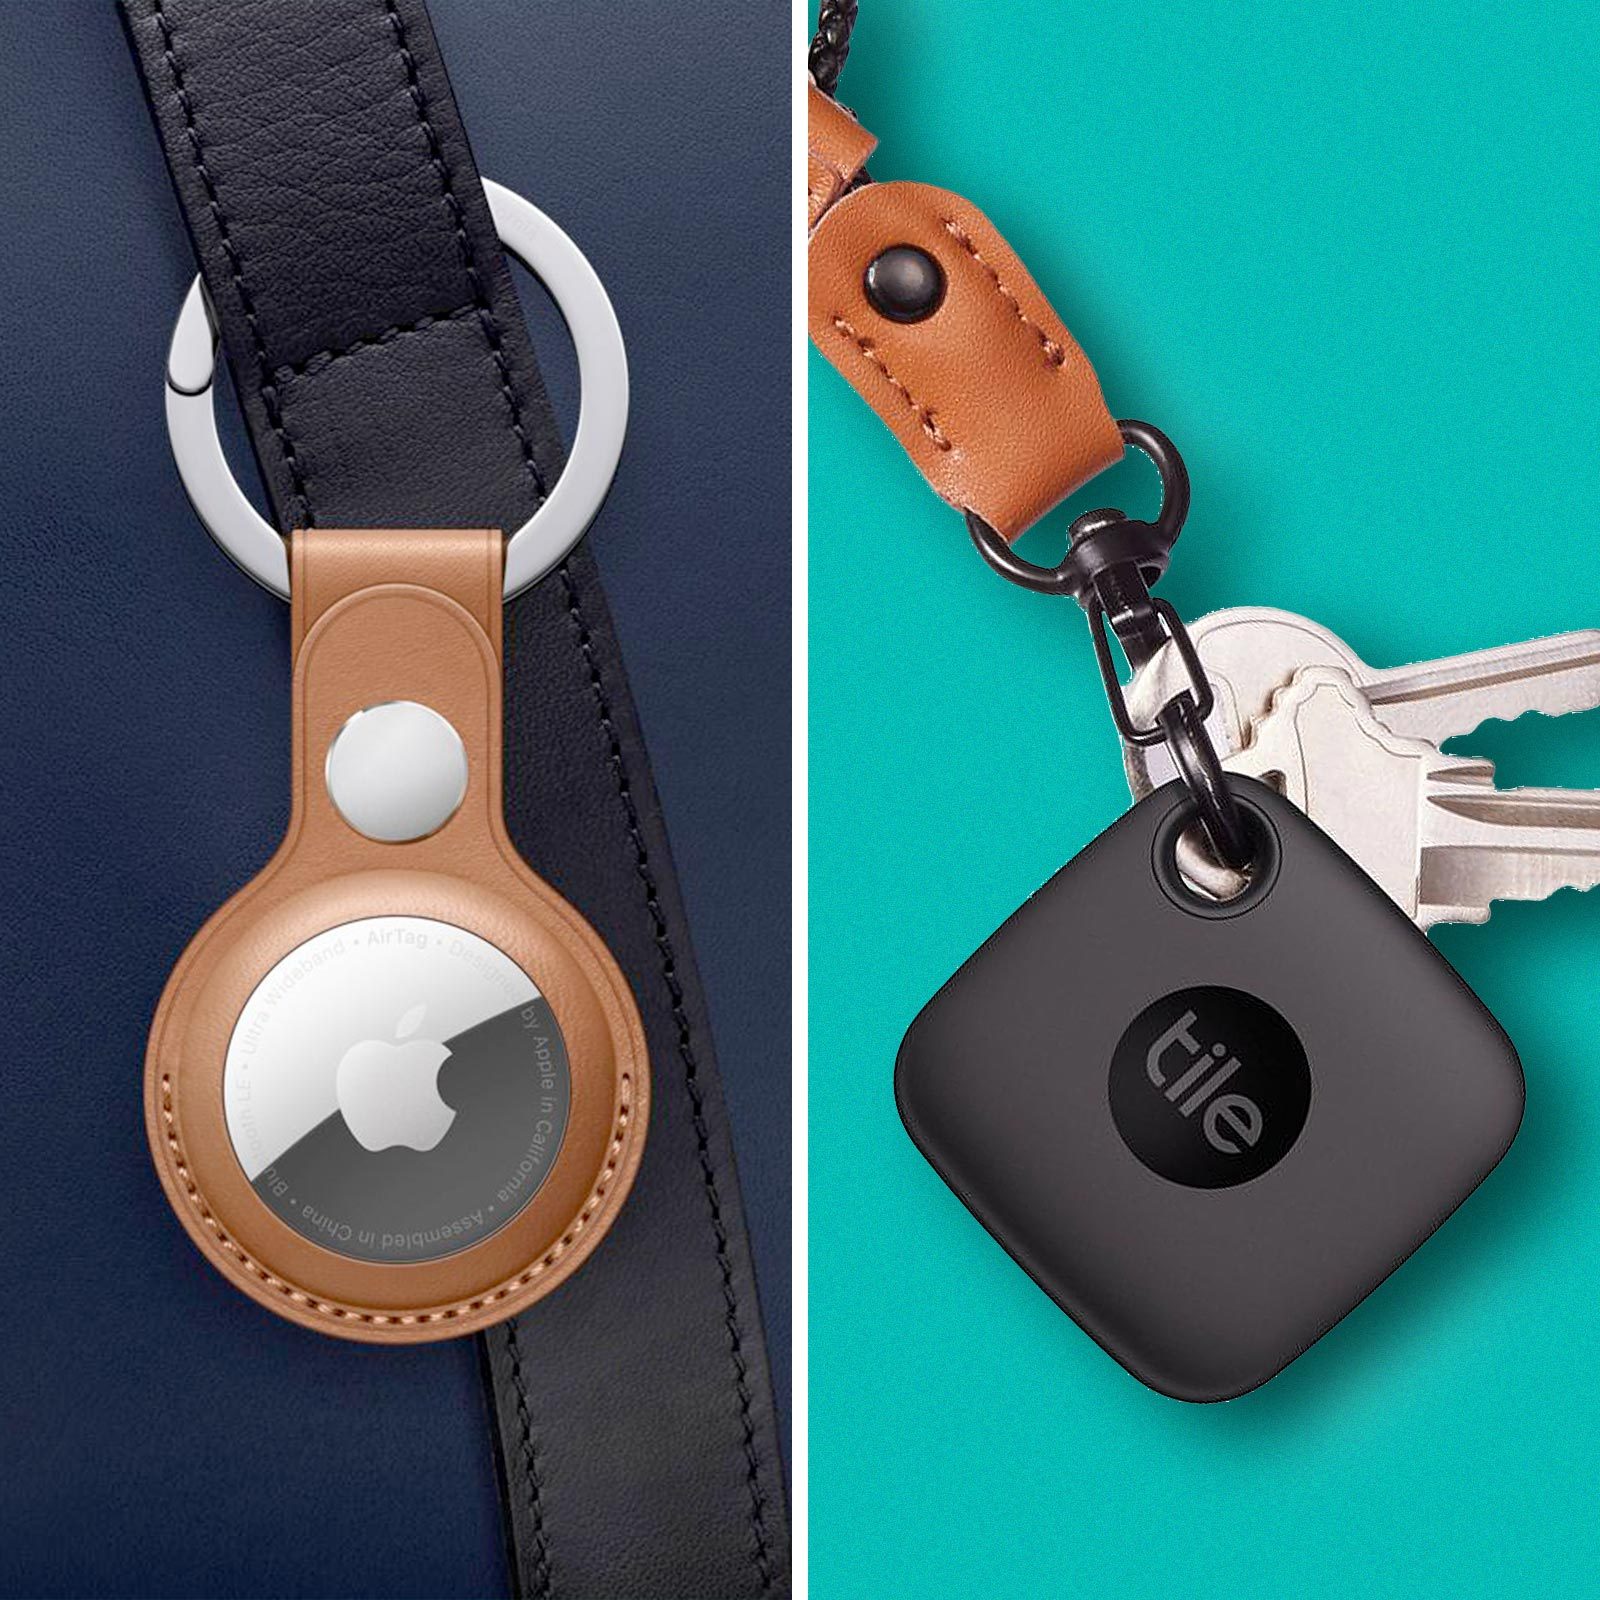 AirTag vs. Tile: Which Bluetooth Tracker Should You Choose?